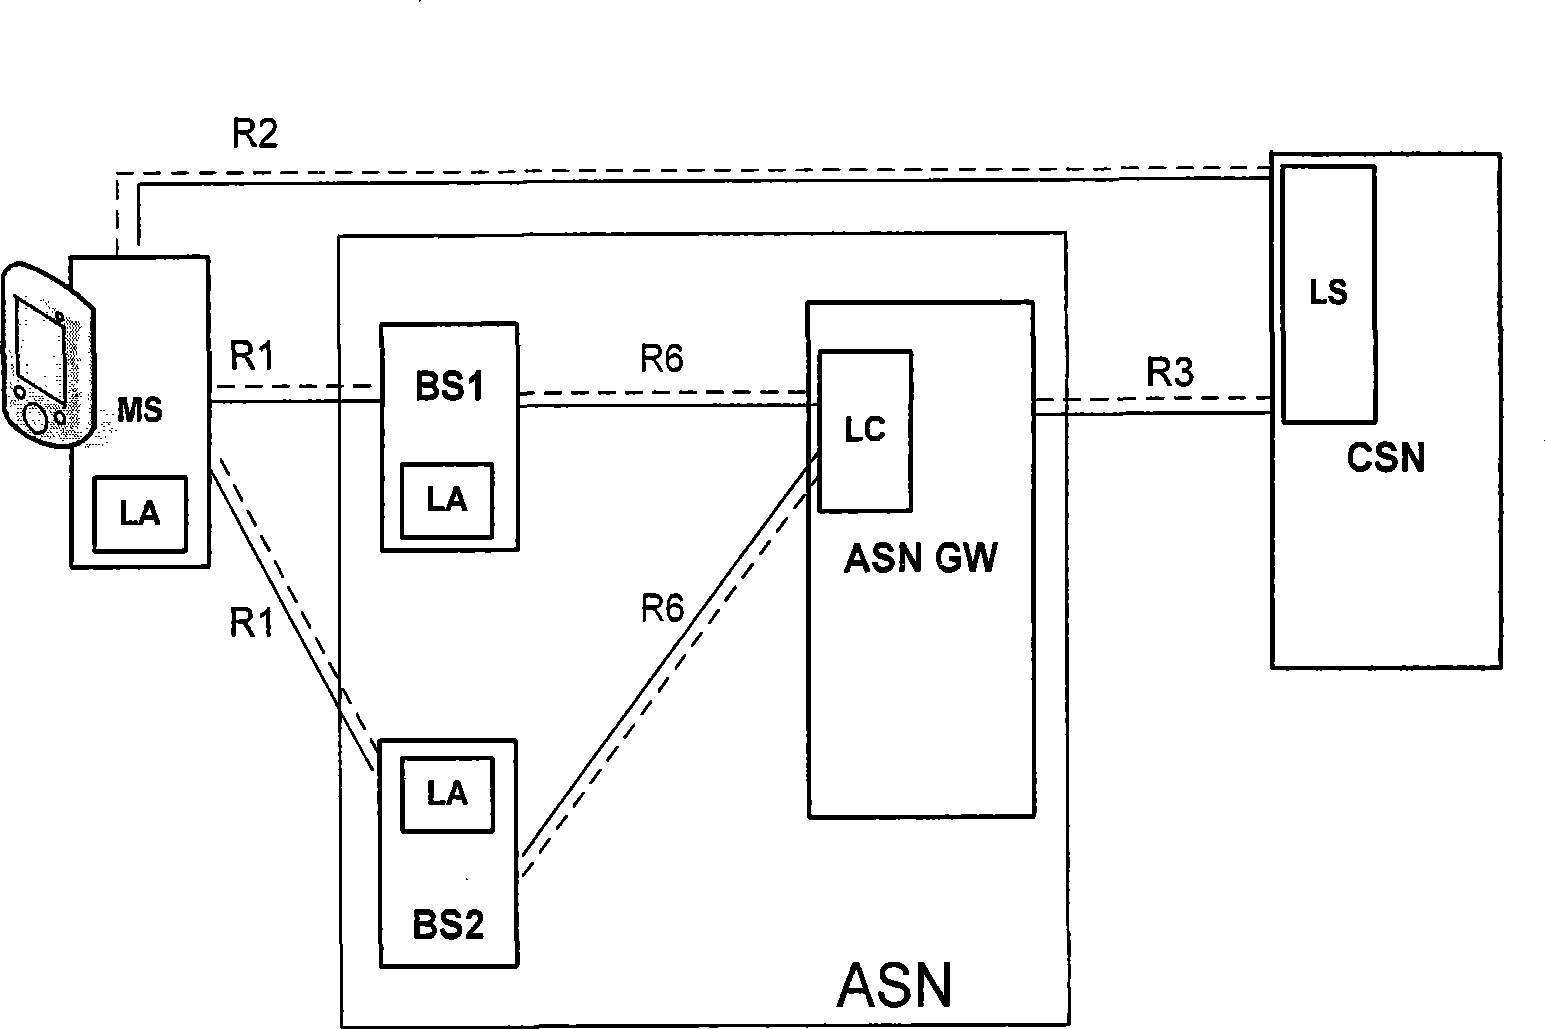 Method for implementing positioning service between ASN and CSN